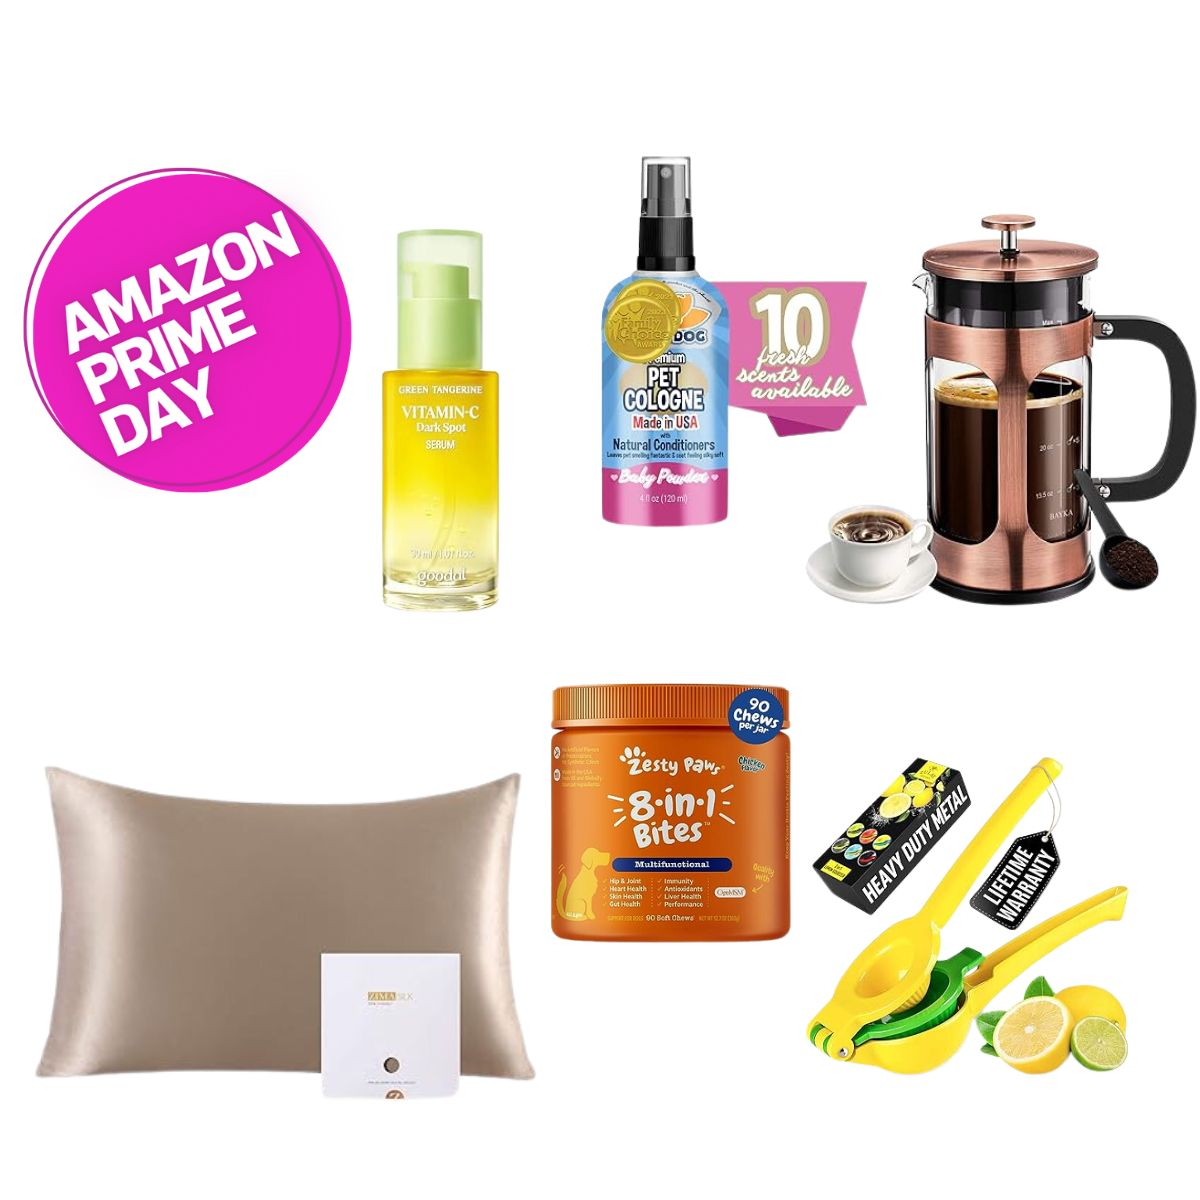 https://akns-images.eonline.com/eol_images/Entire_Site/2023910/rs_1200x1200-231010160451-Copy_of_Amazon_Prime_Day_Sticker_1200_x_1200_px.jpg?fit=around%7C1080:1080&output-quality=90&crop=1080:1080;center,top